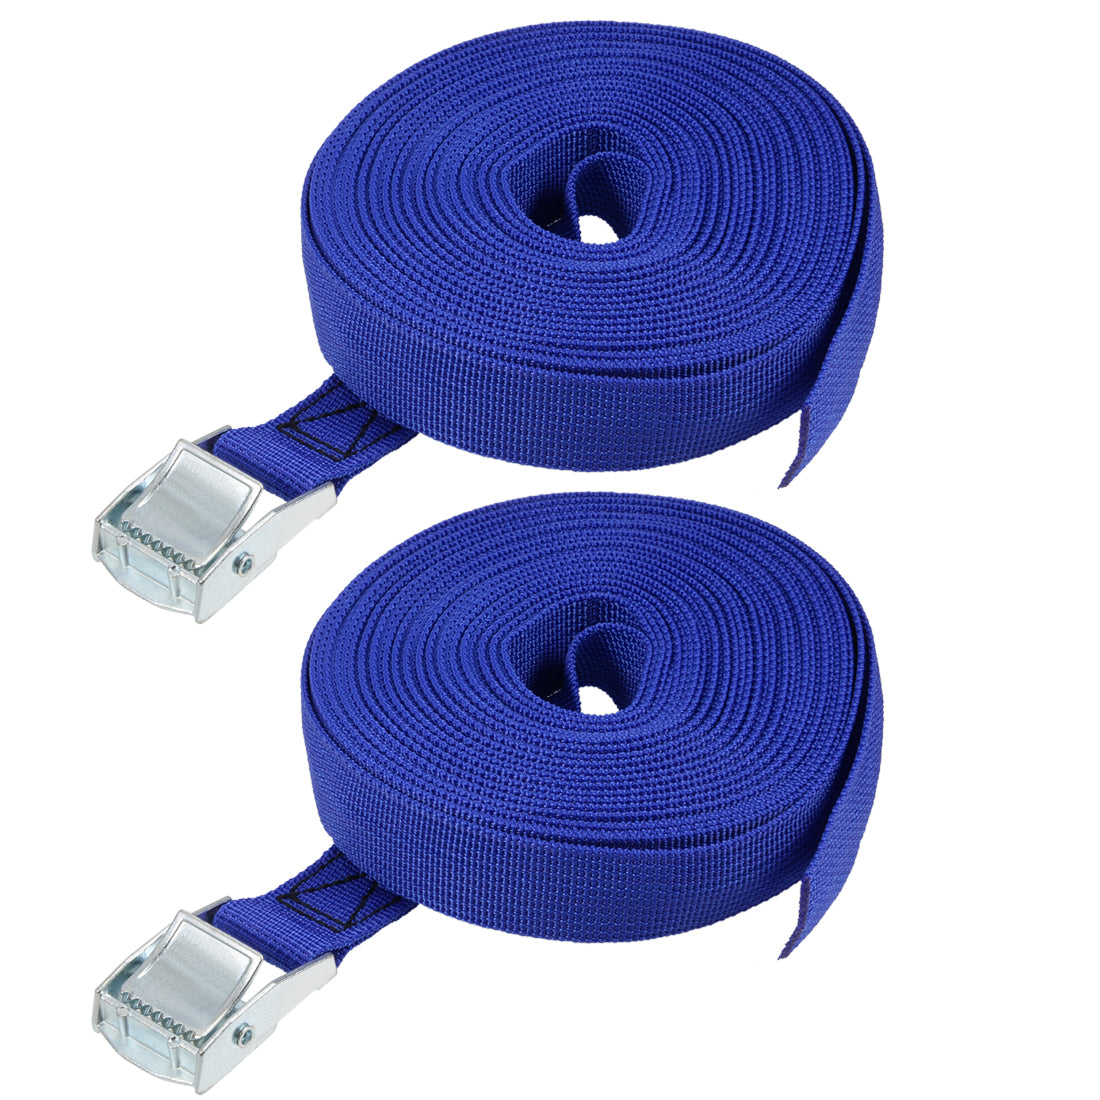 uxcell Uxcell 9M x 25mm Lashing Strap Cargo Tie Down Straps w Cam Lock Buckle 250Kg Work Load, Blue, 2Pcs